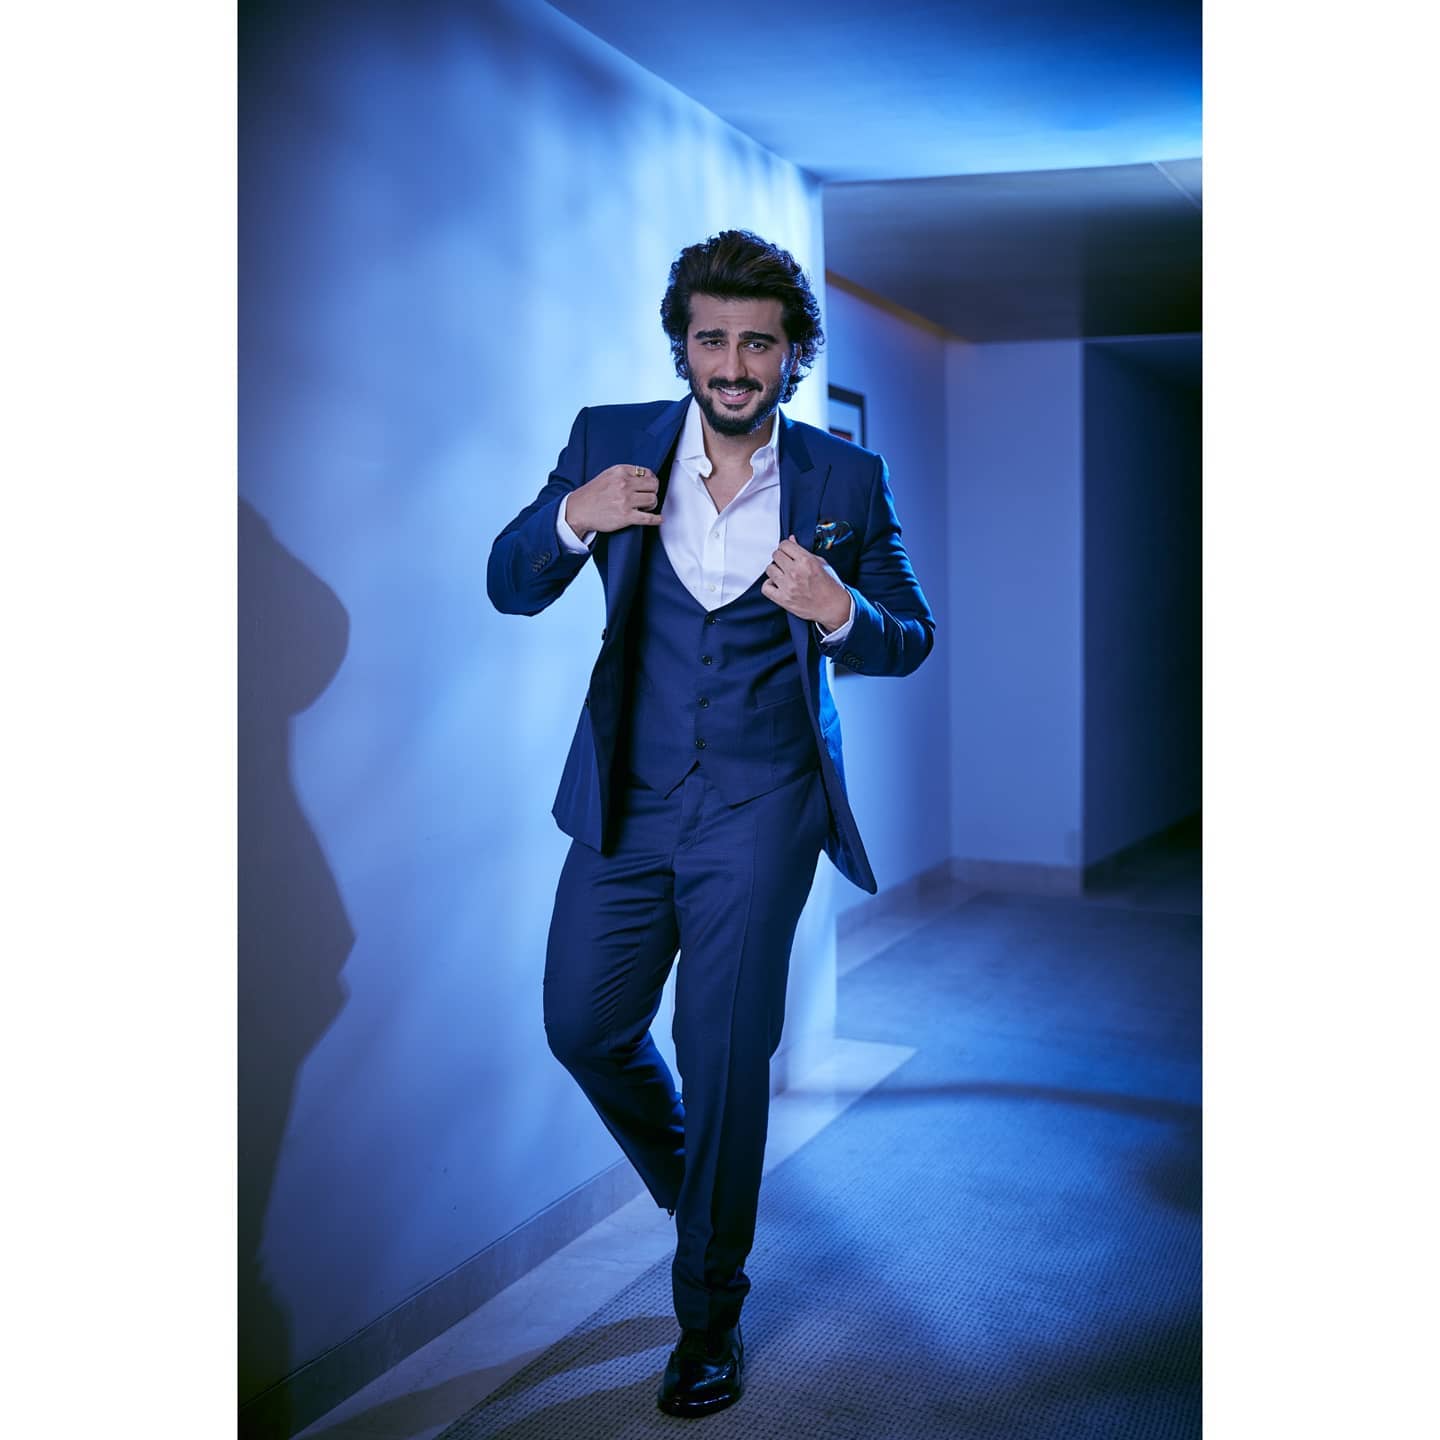 Bollywood Kapoor Men Have Grooms-To-Be Hooked To Their Fashion Statements!